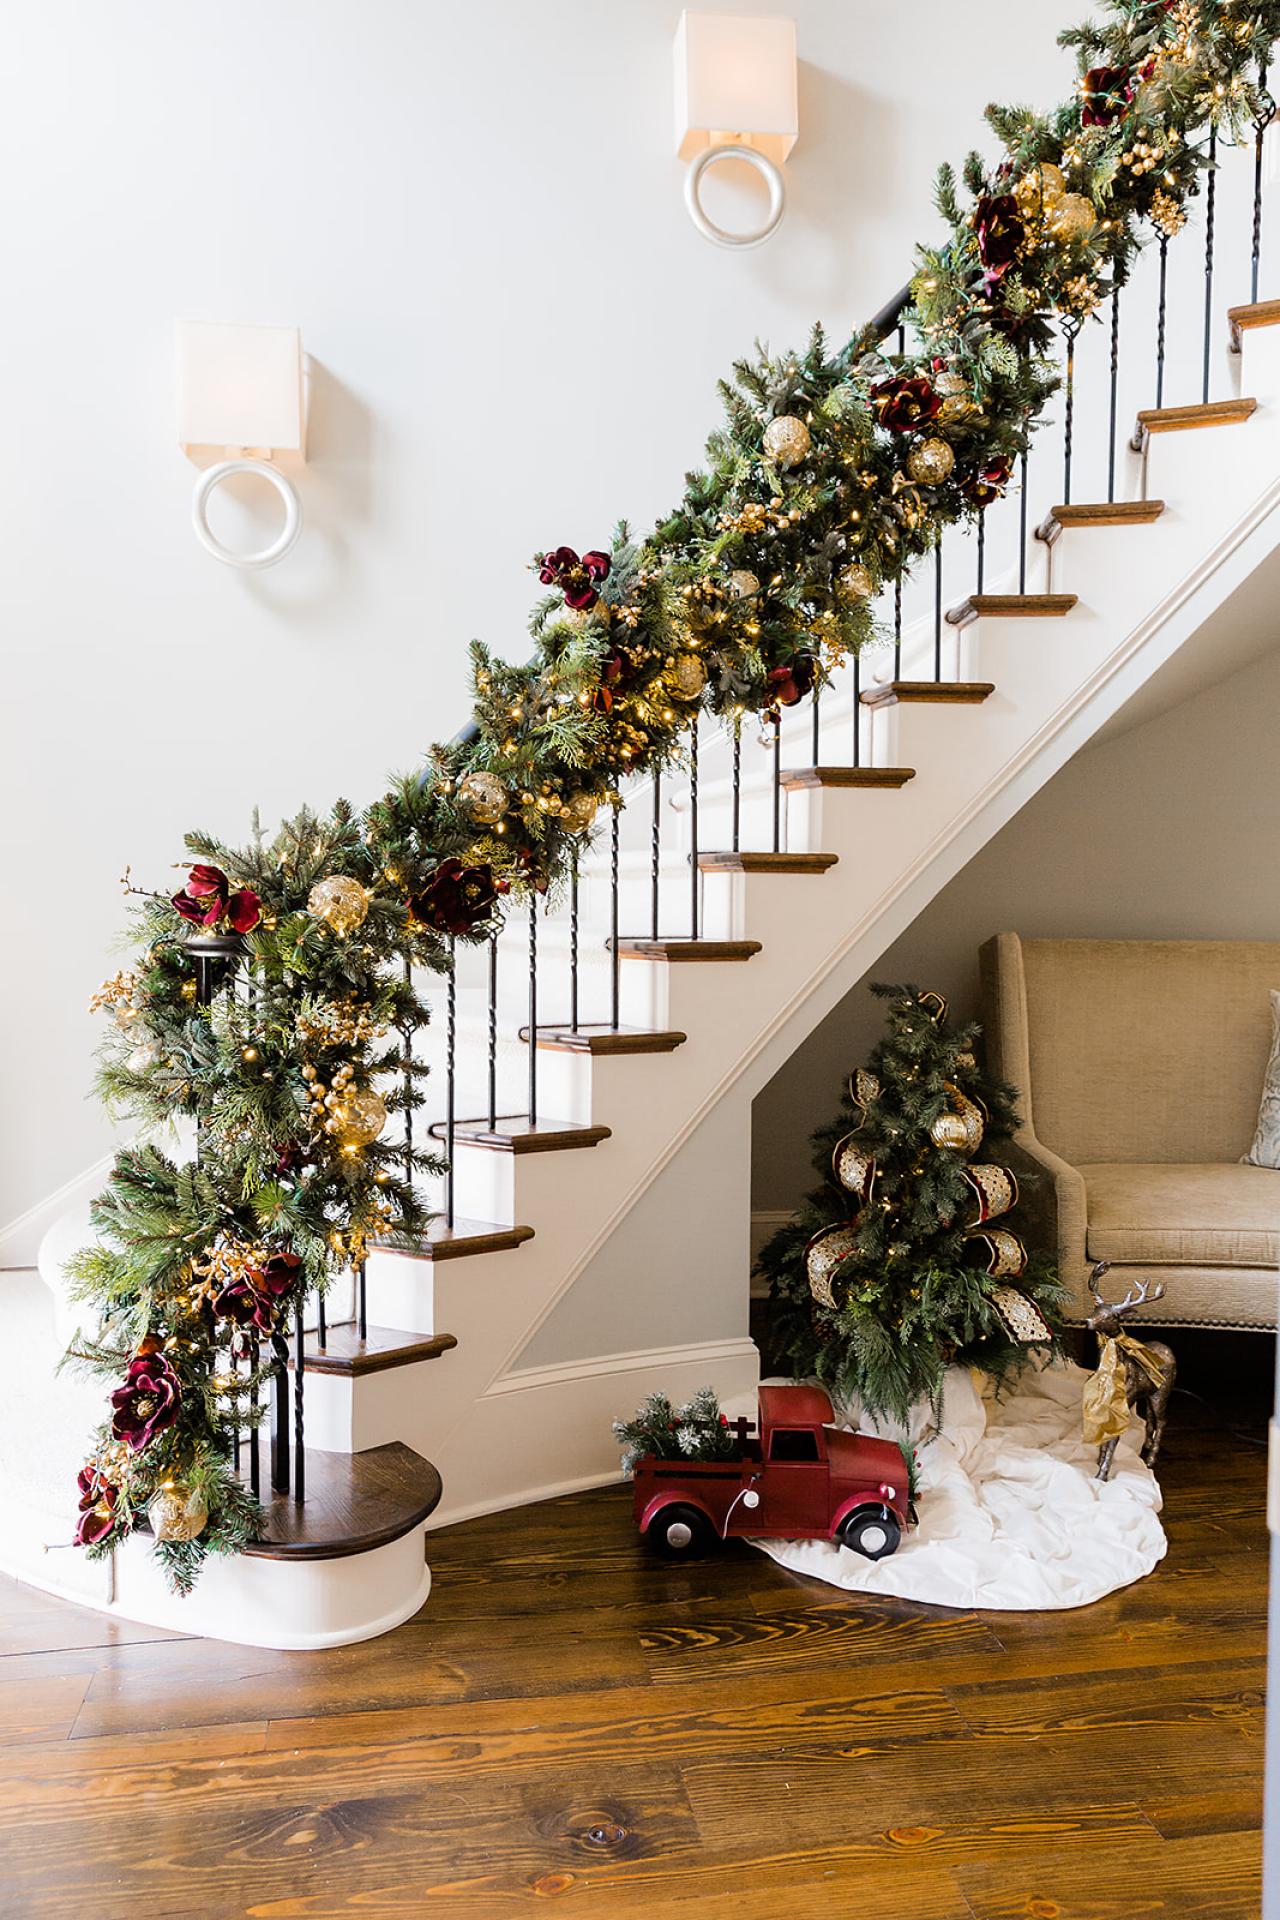 30 Best Christmas Staircase Decorating Ideas 2021 HGTV  3pc Christmas